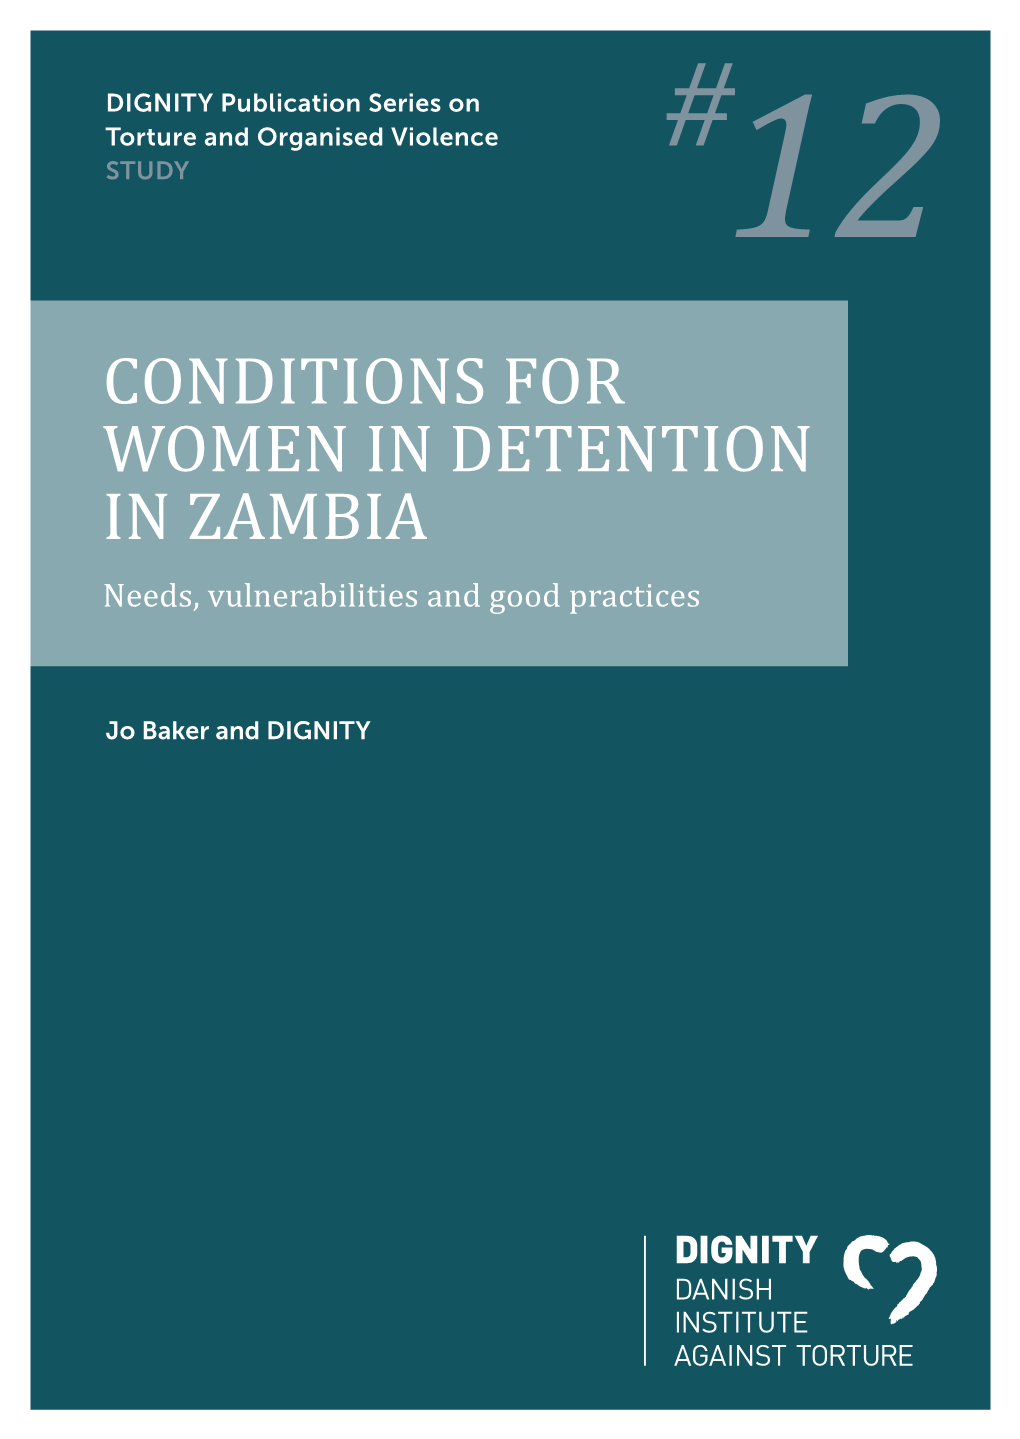 CONDITIONS for WOMEN in DETENTION in ZAMBIA Needs, Vulnerabilities and Good Practices